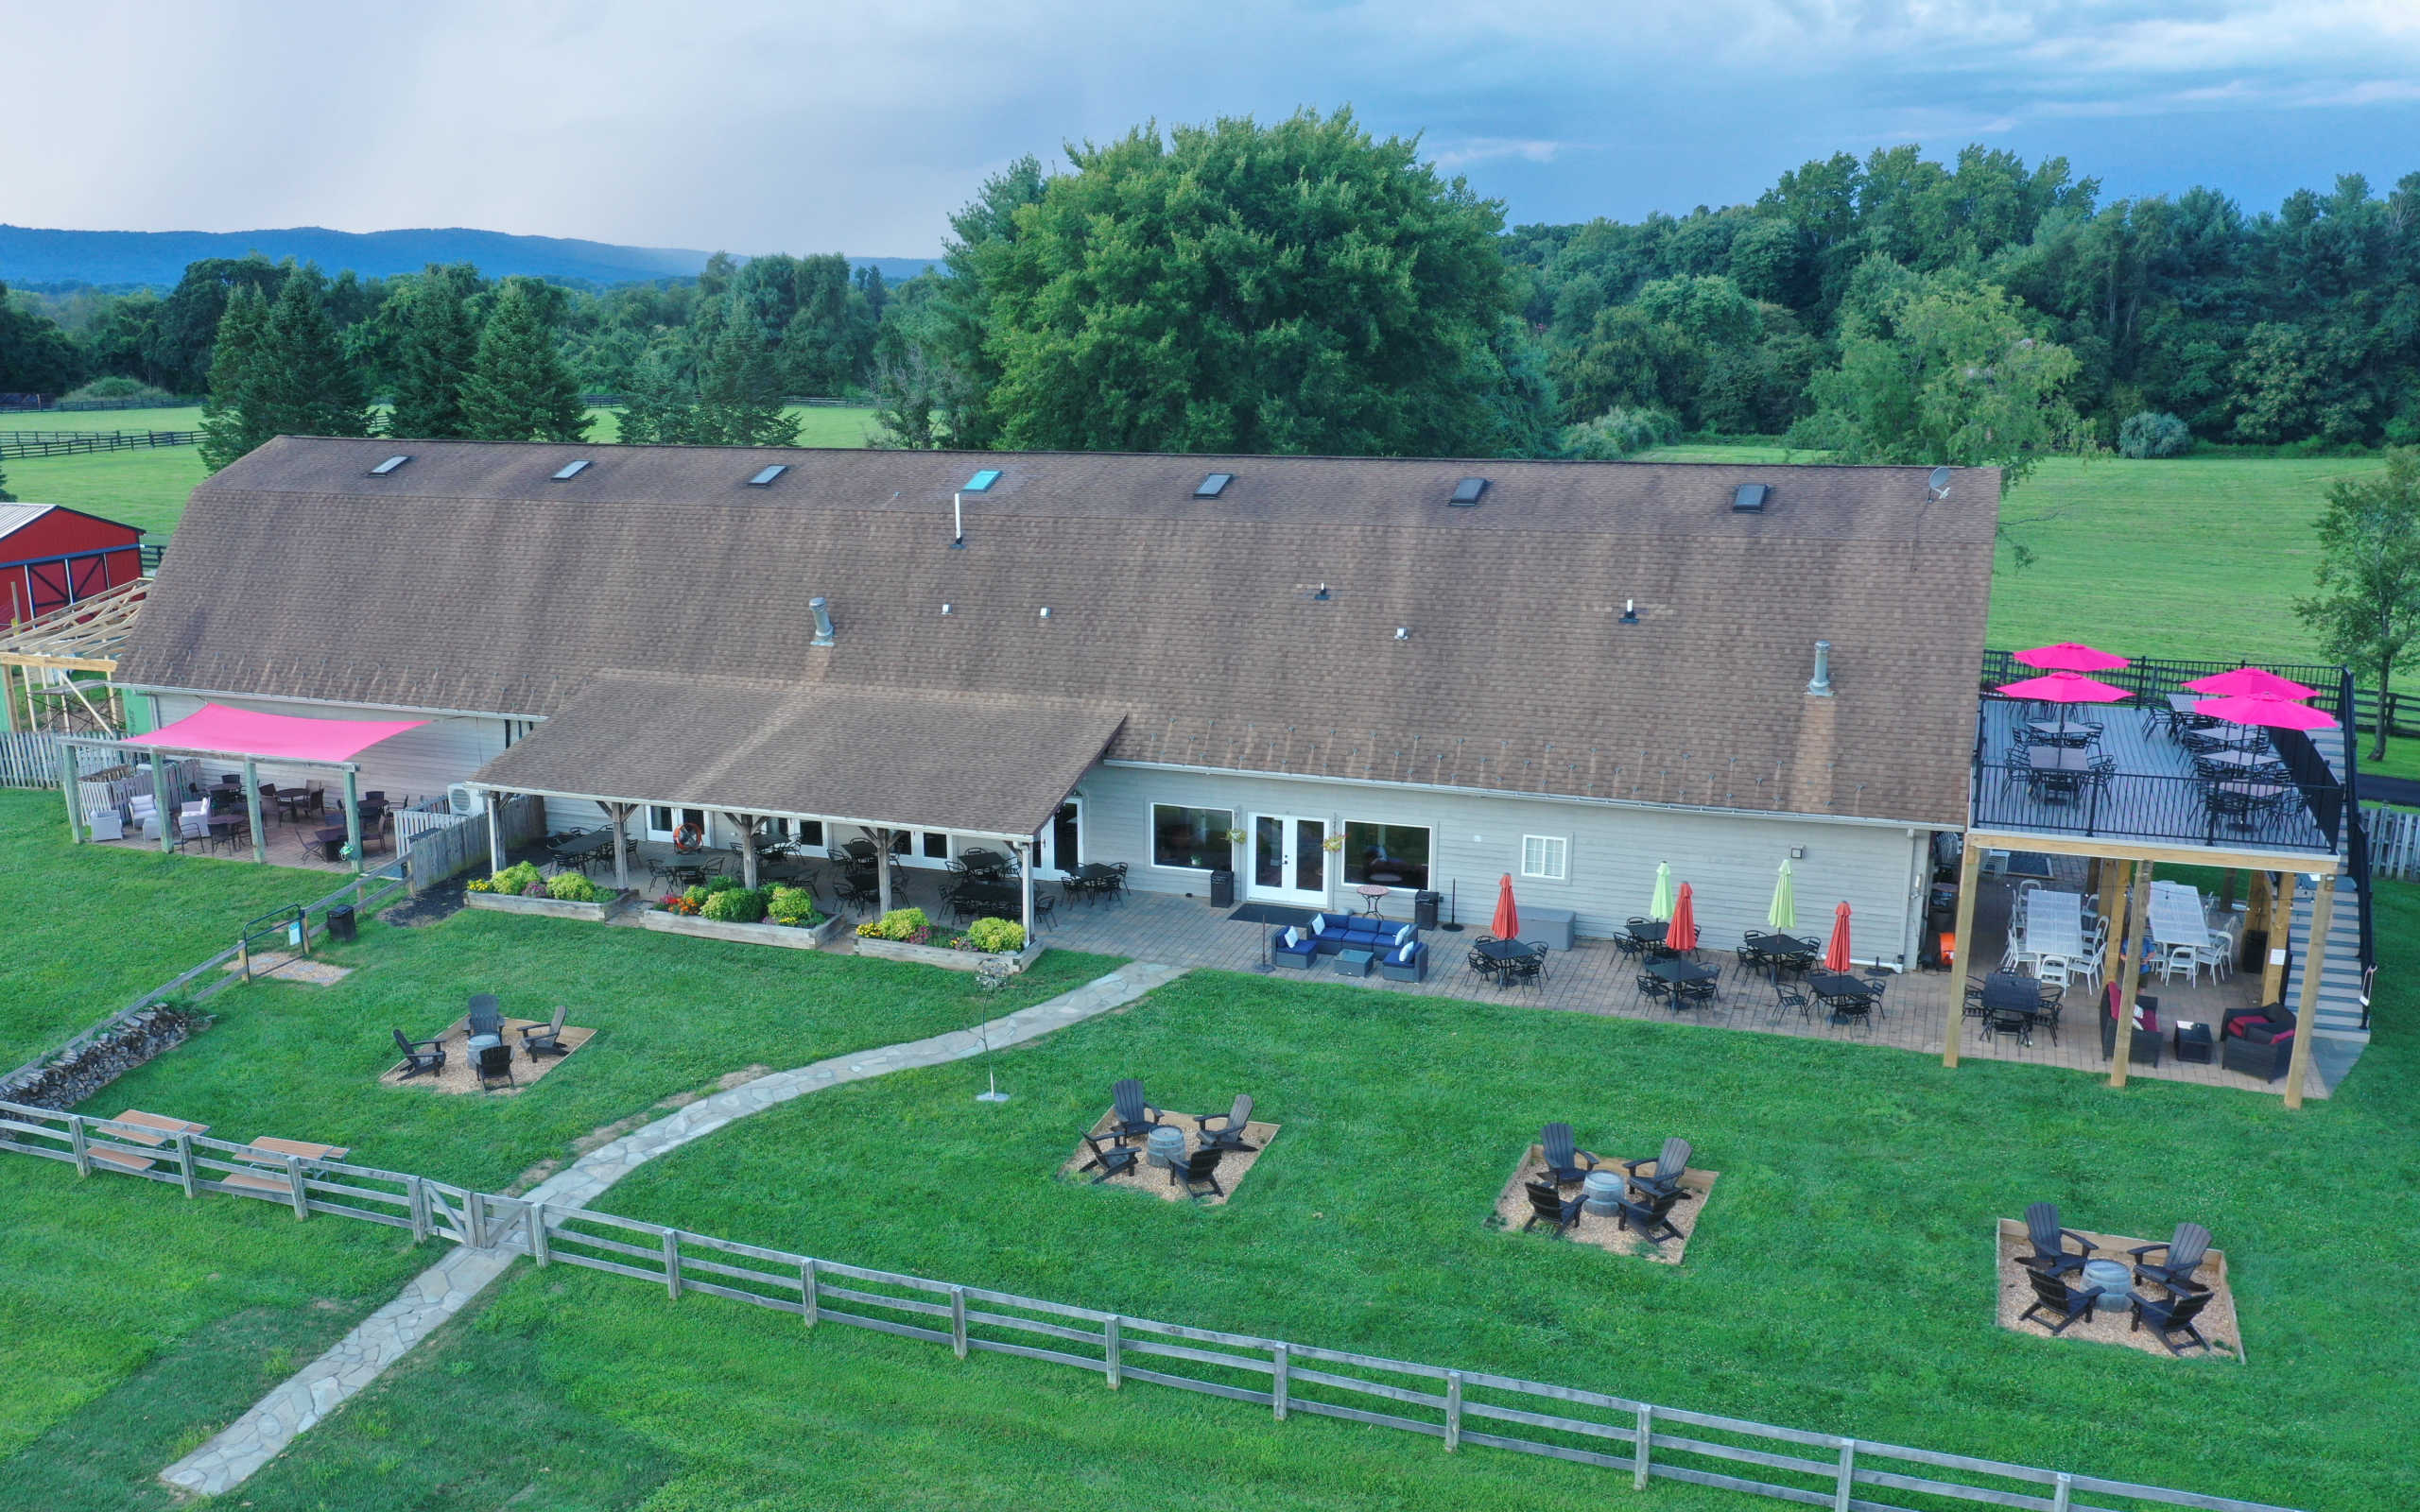 drone shot of the winery showing extensive lawn, patio, and deck spaces for private events